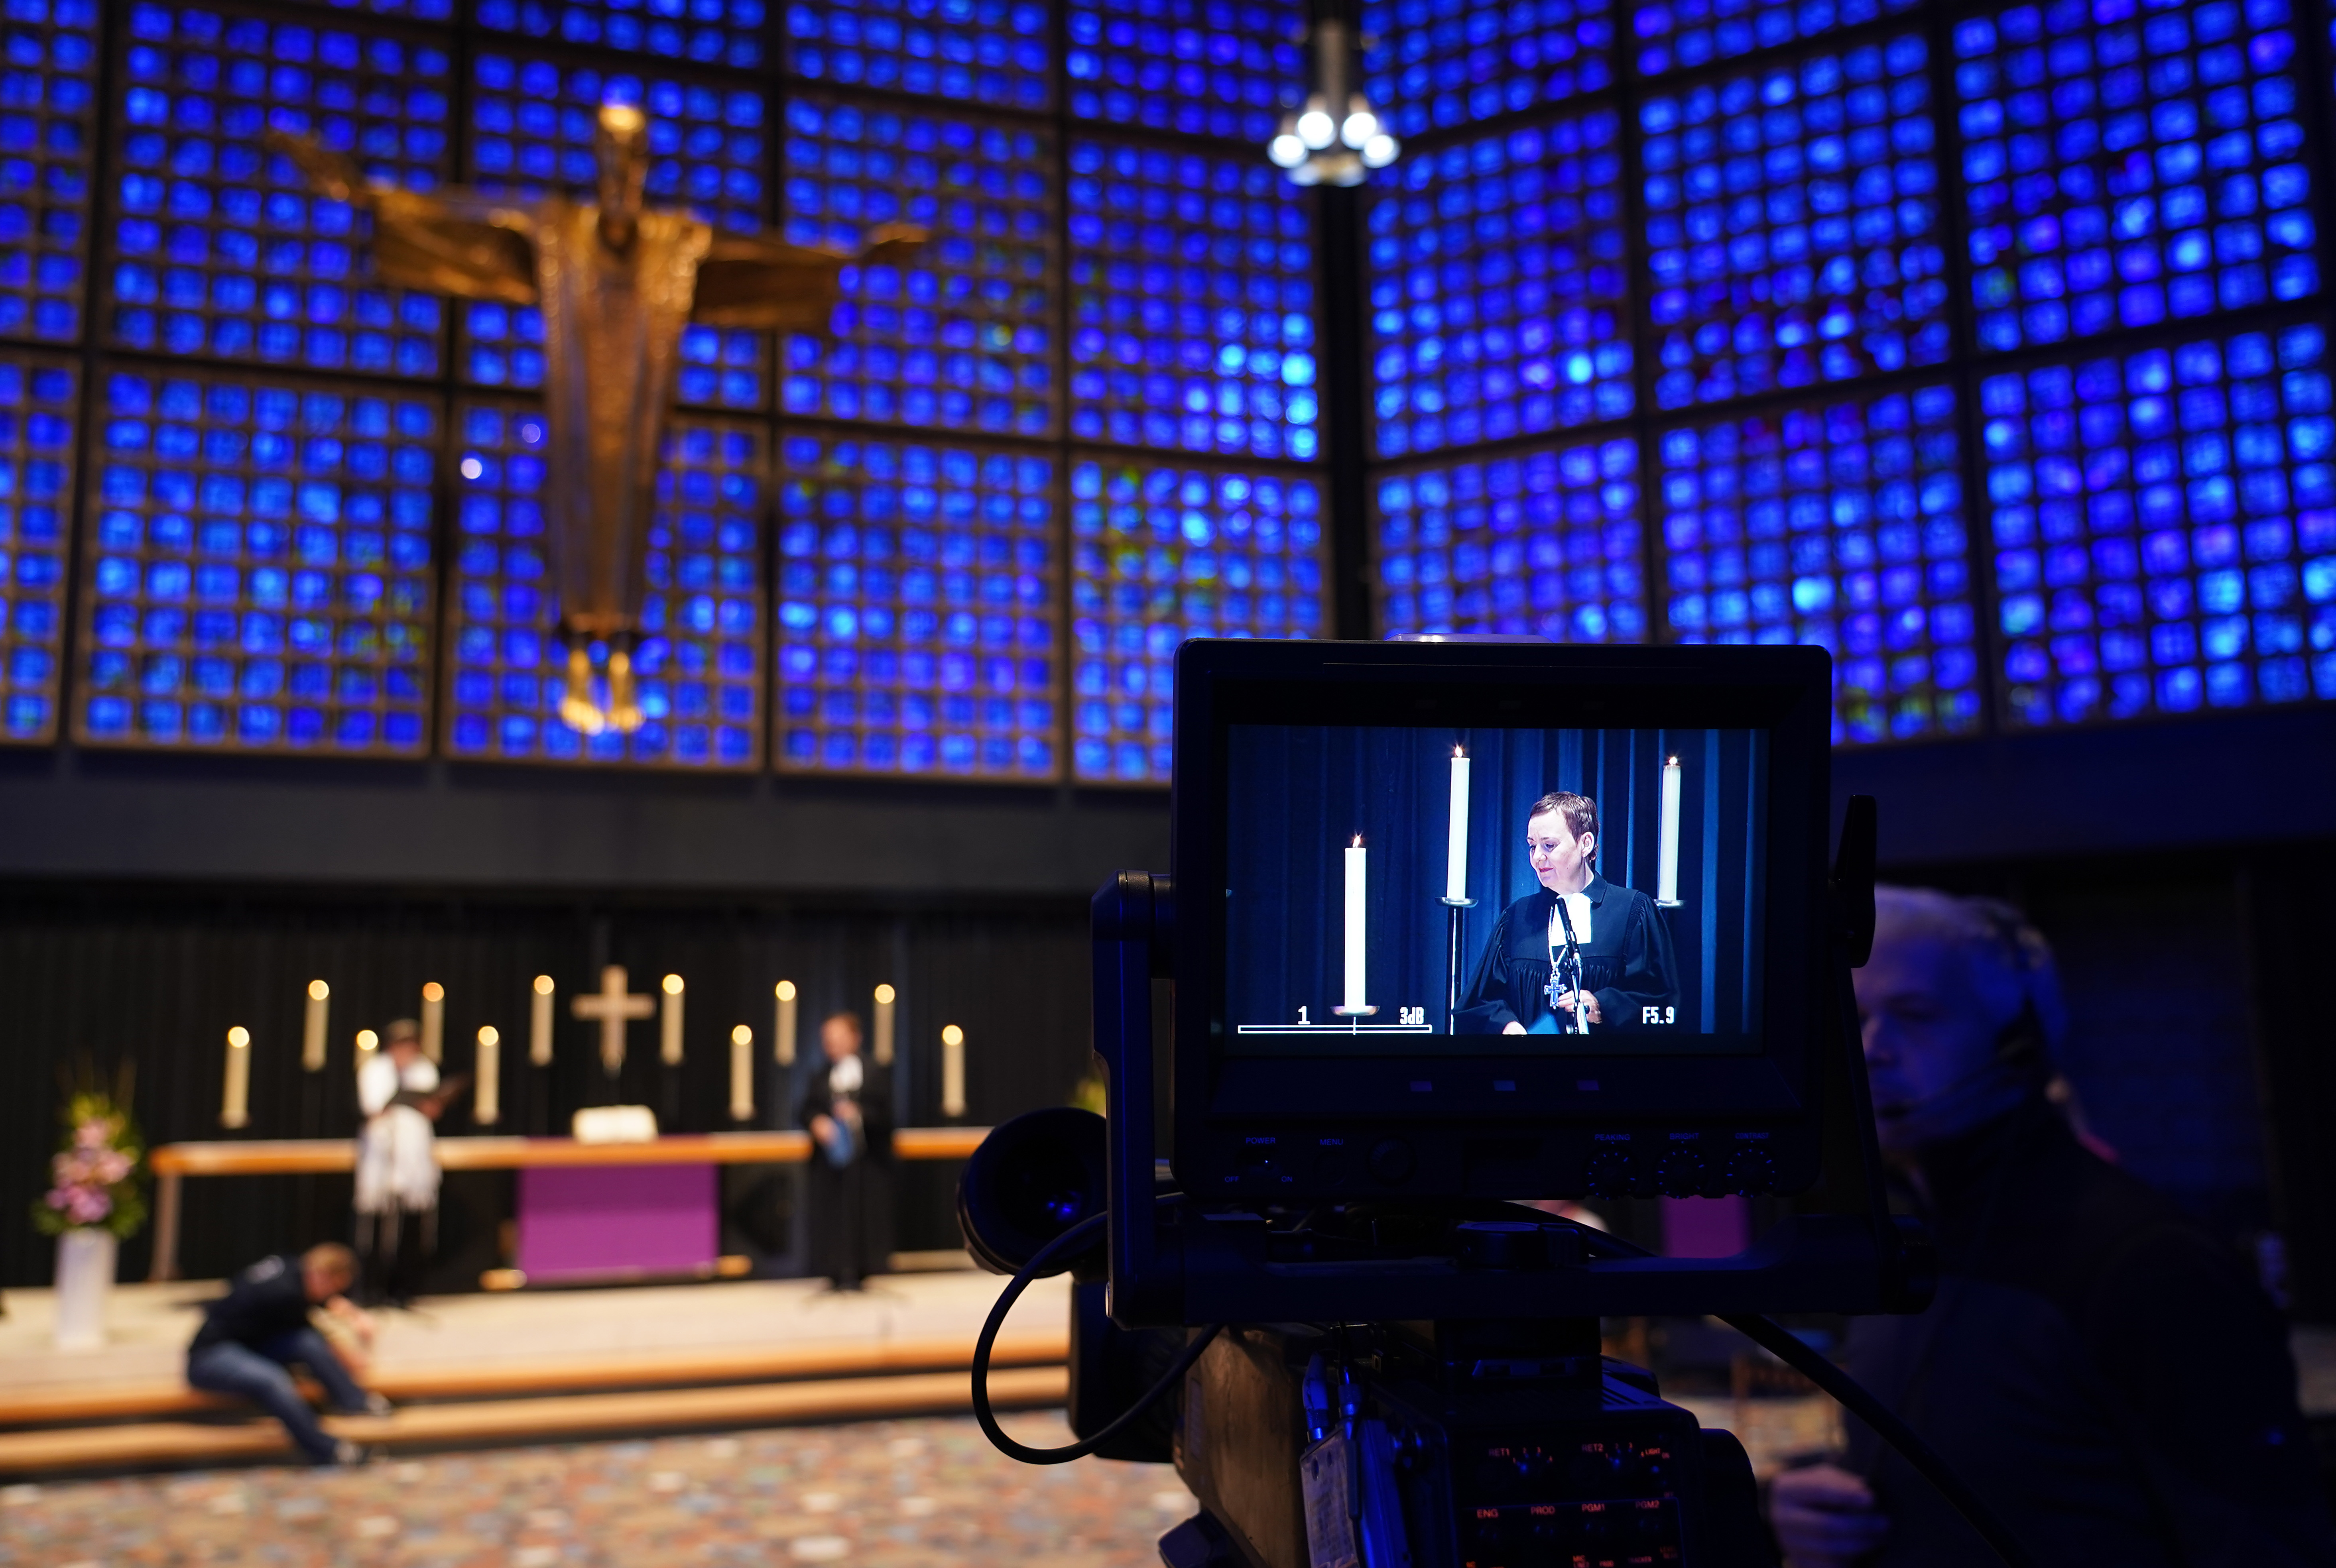 Protestant theologian Ulrike Trautwein prepares for a an interfaith church service at the Kaiser Wilhelm Memorial Church that was to be broadcast live on television on March 22, 2020 in Berlin, Germany. (Photo by Sean Gallup/Getty Images)